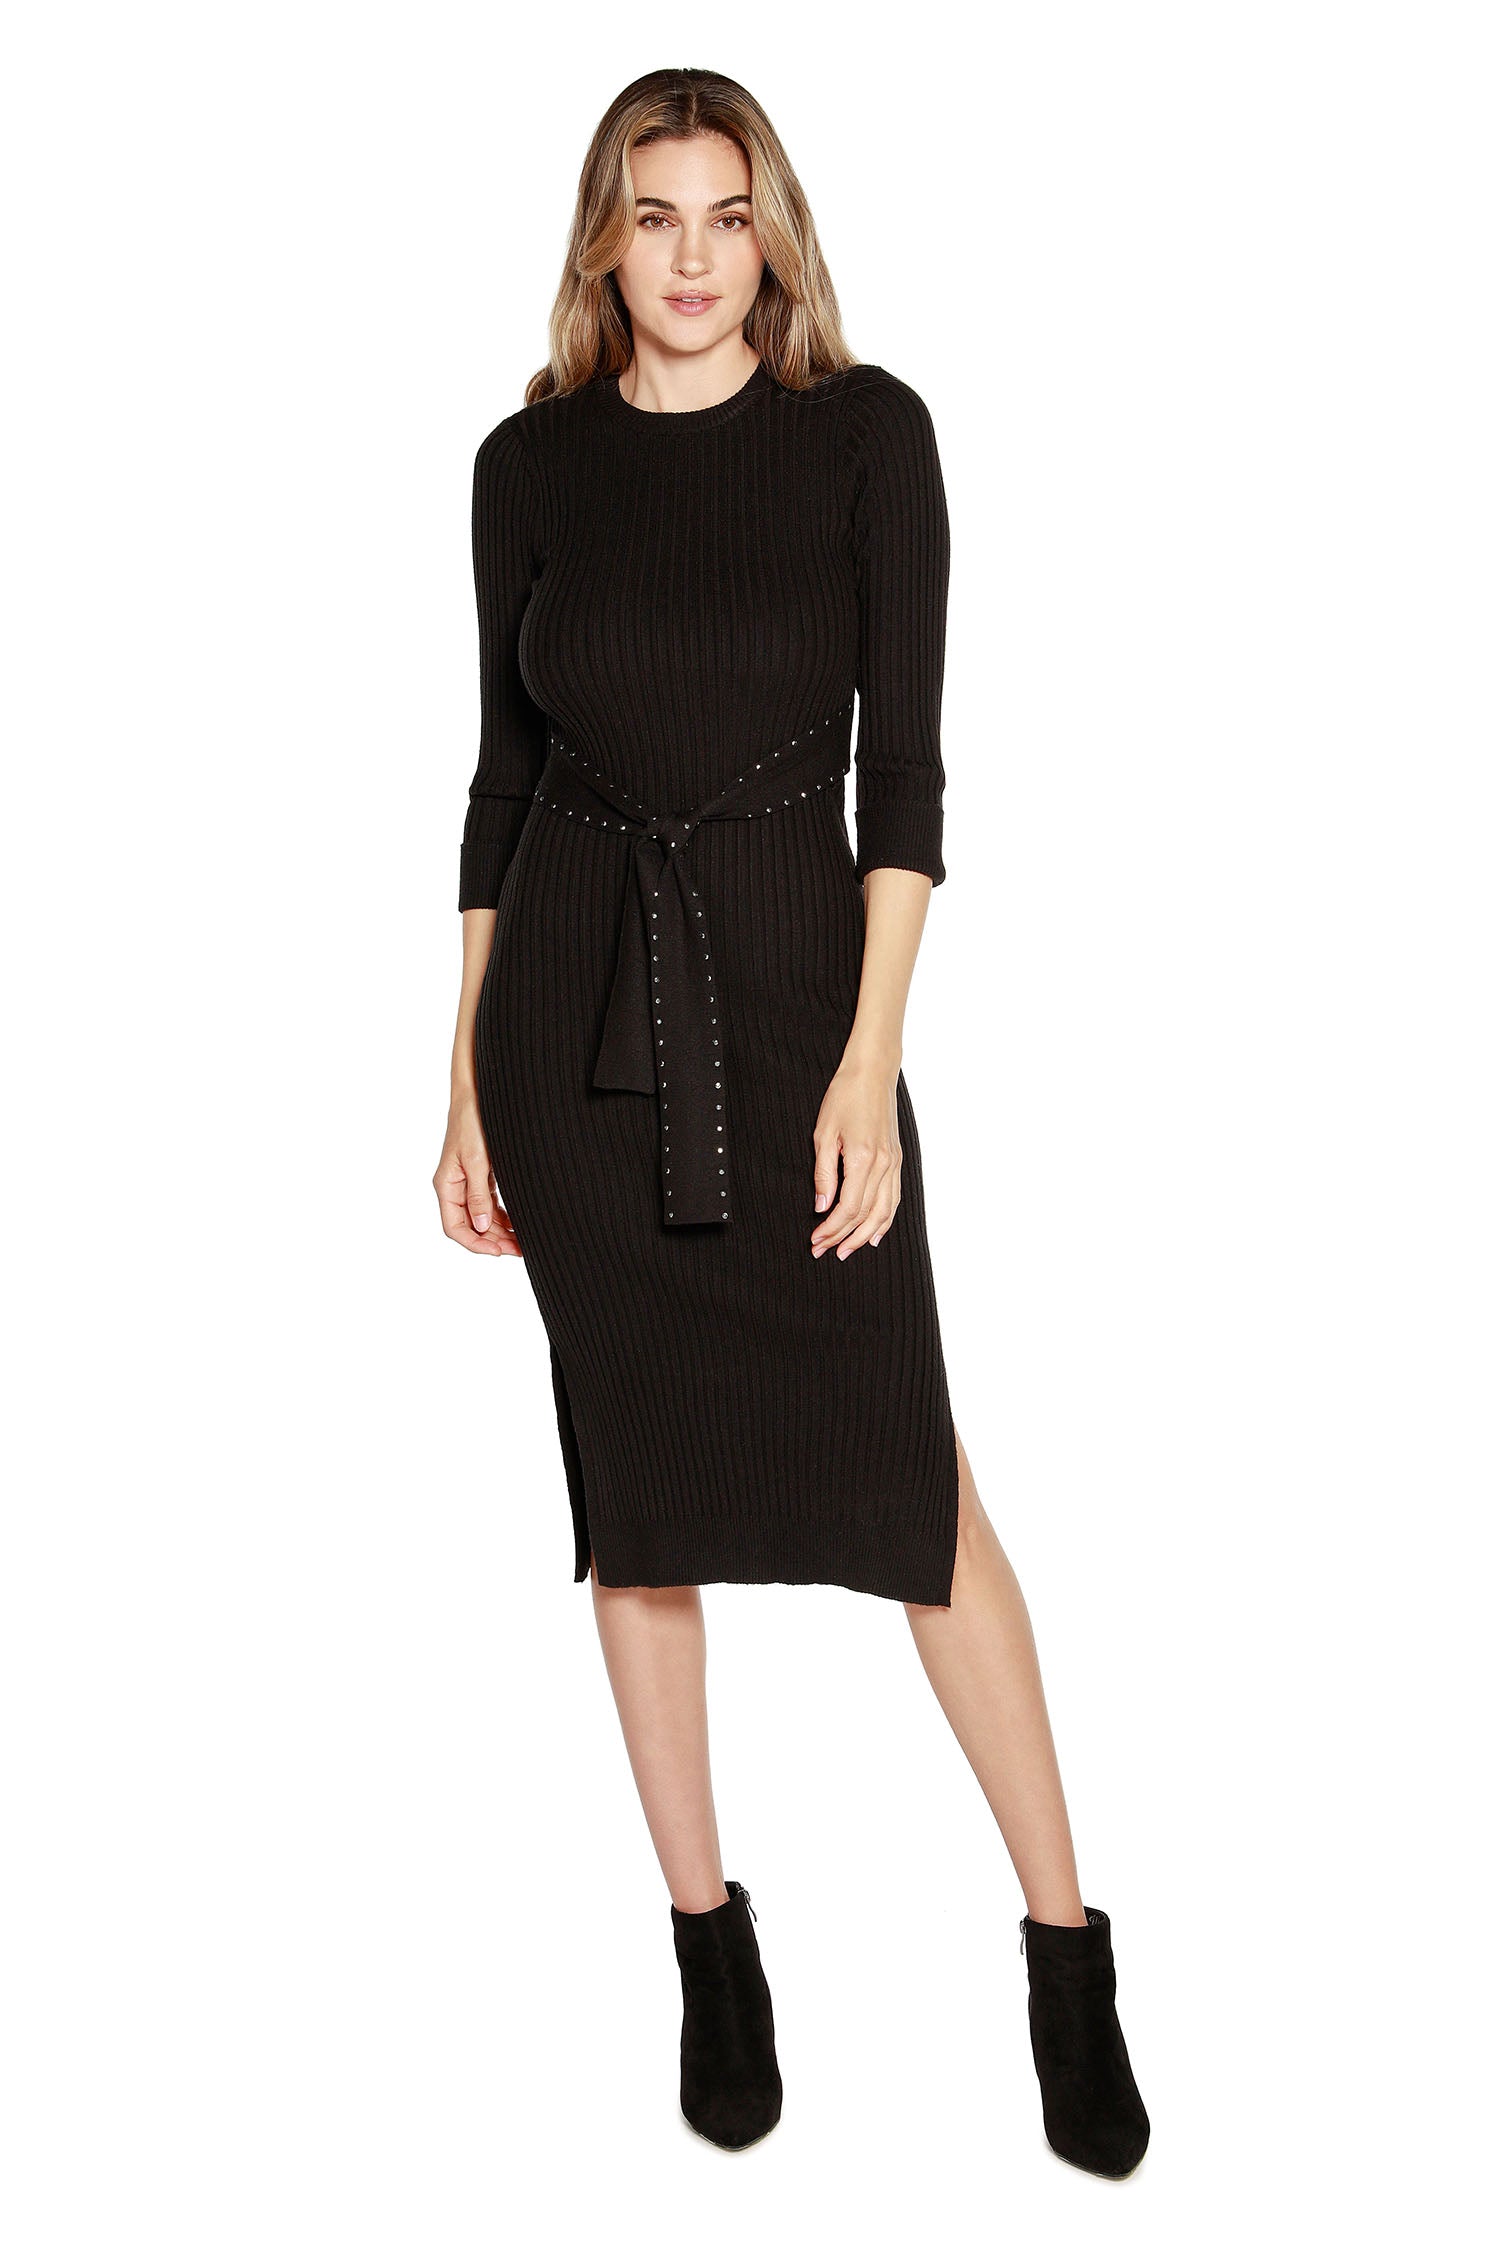 Women's Body Con Sweater Dress with 3/4 Sleeves and Embellished Belt